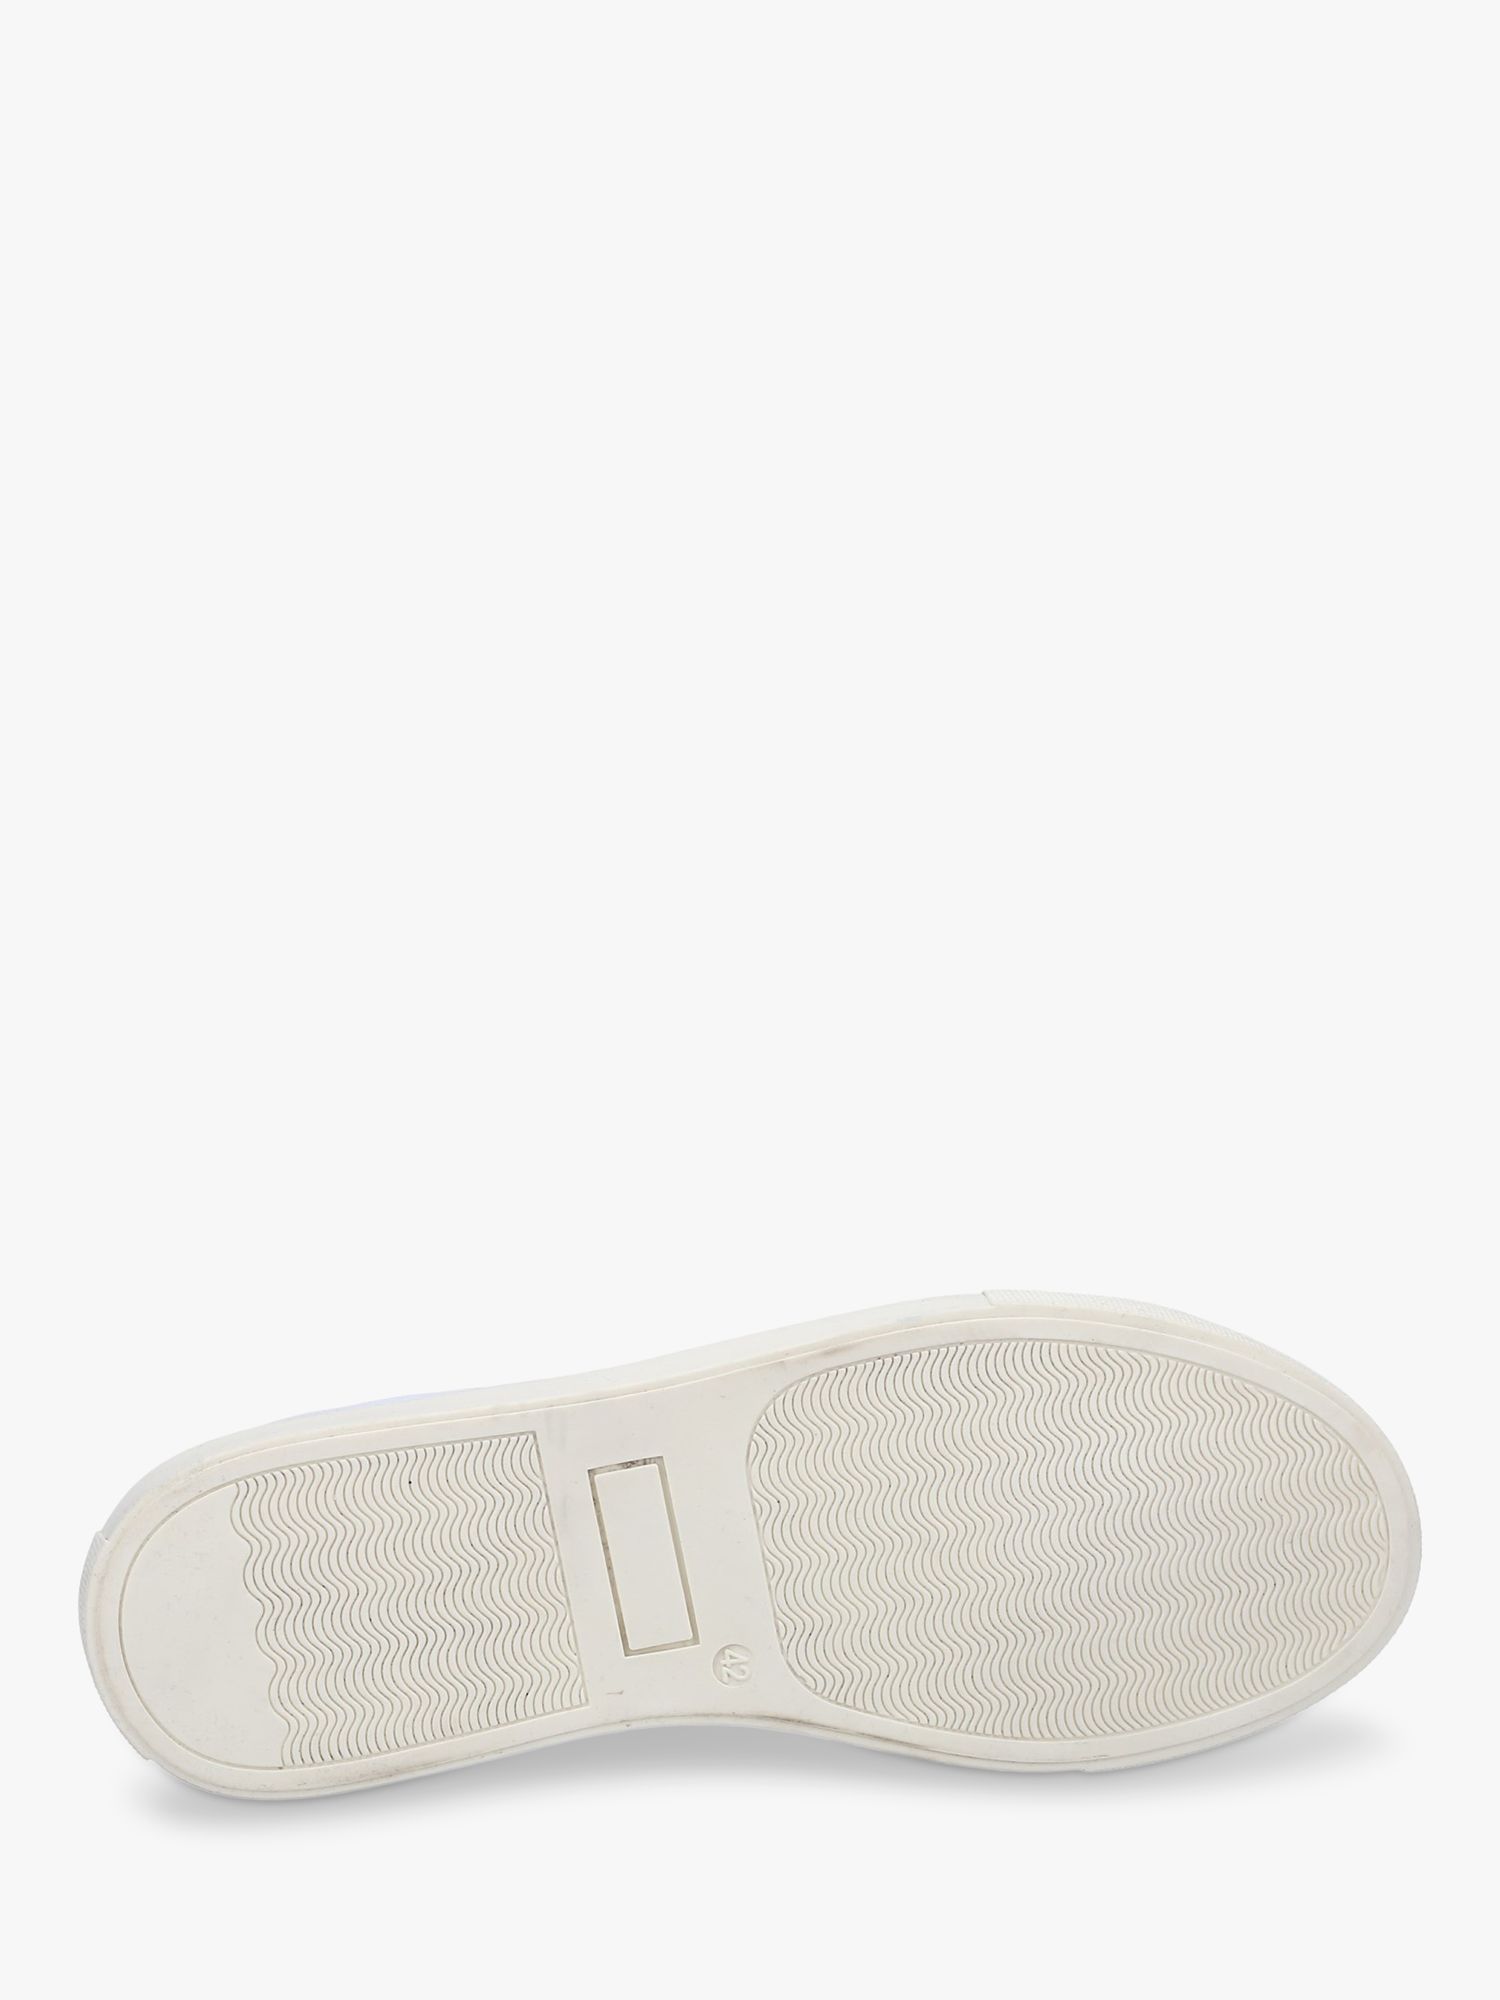 Buy Hush Puppies Colton Cupsole Trainers Online at johnlewis.com